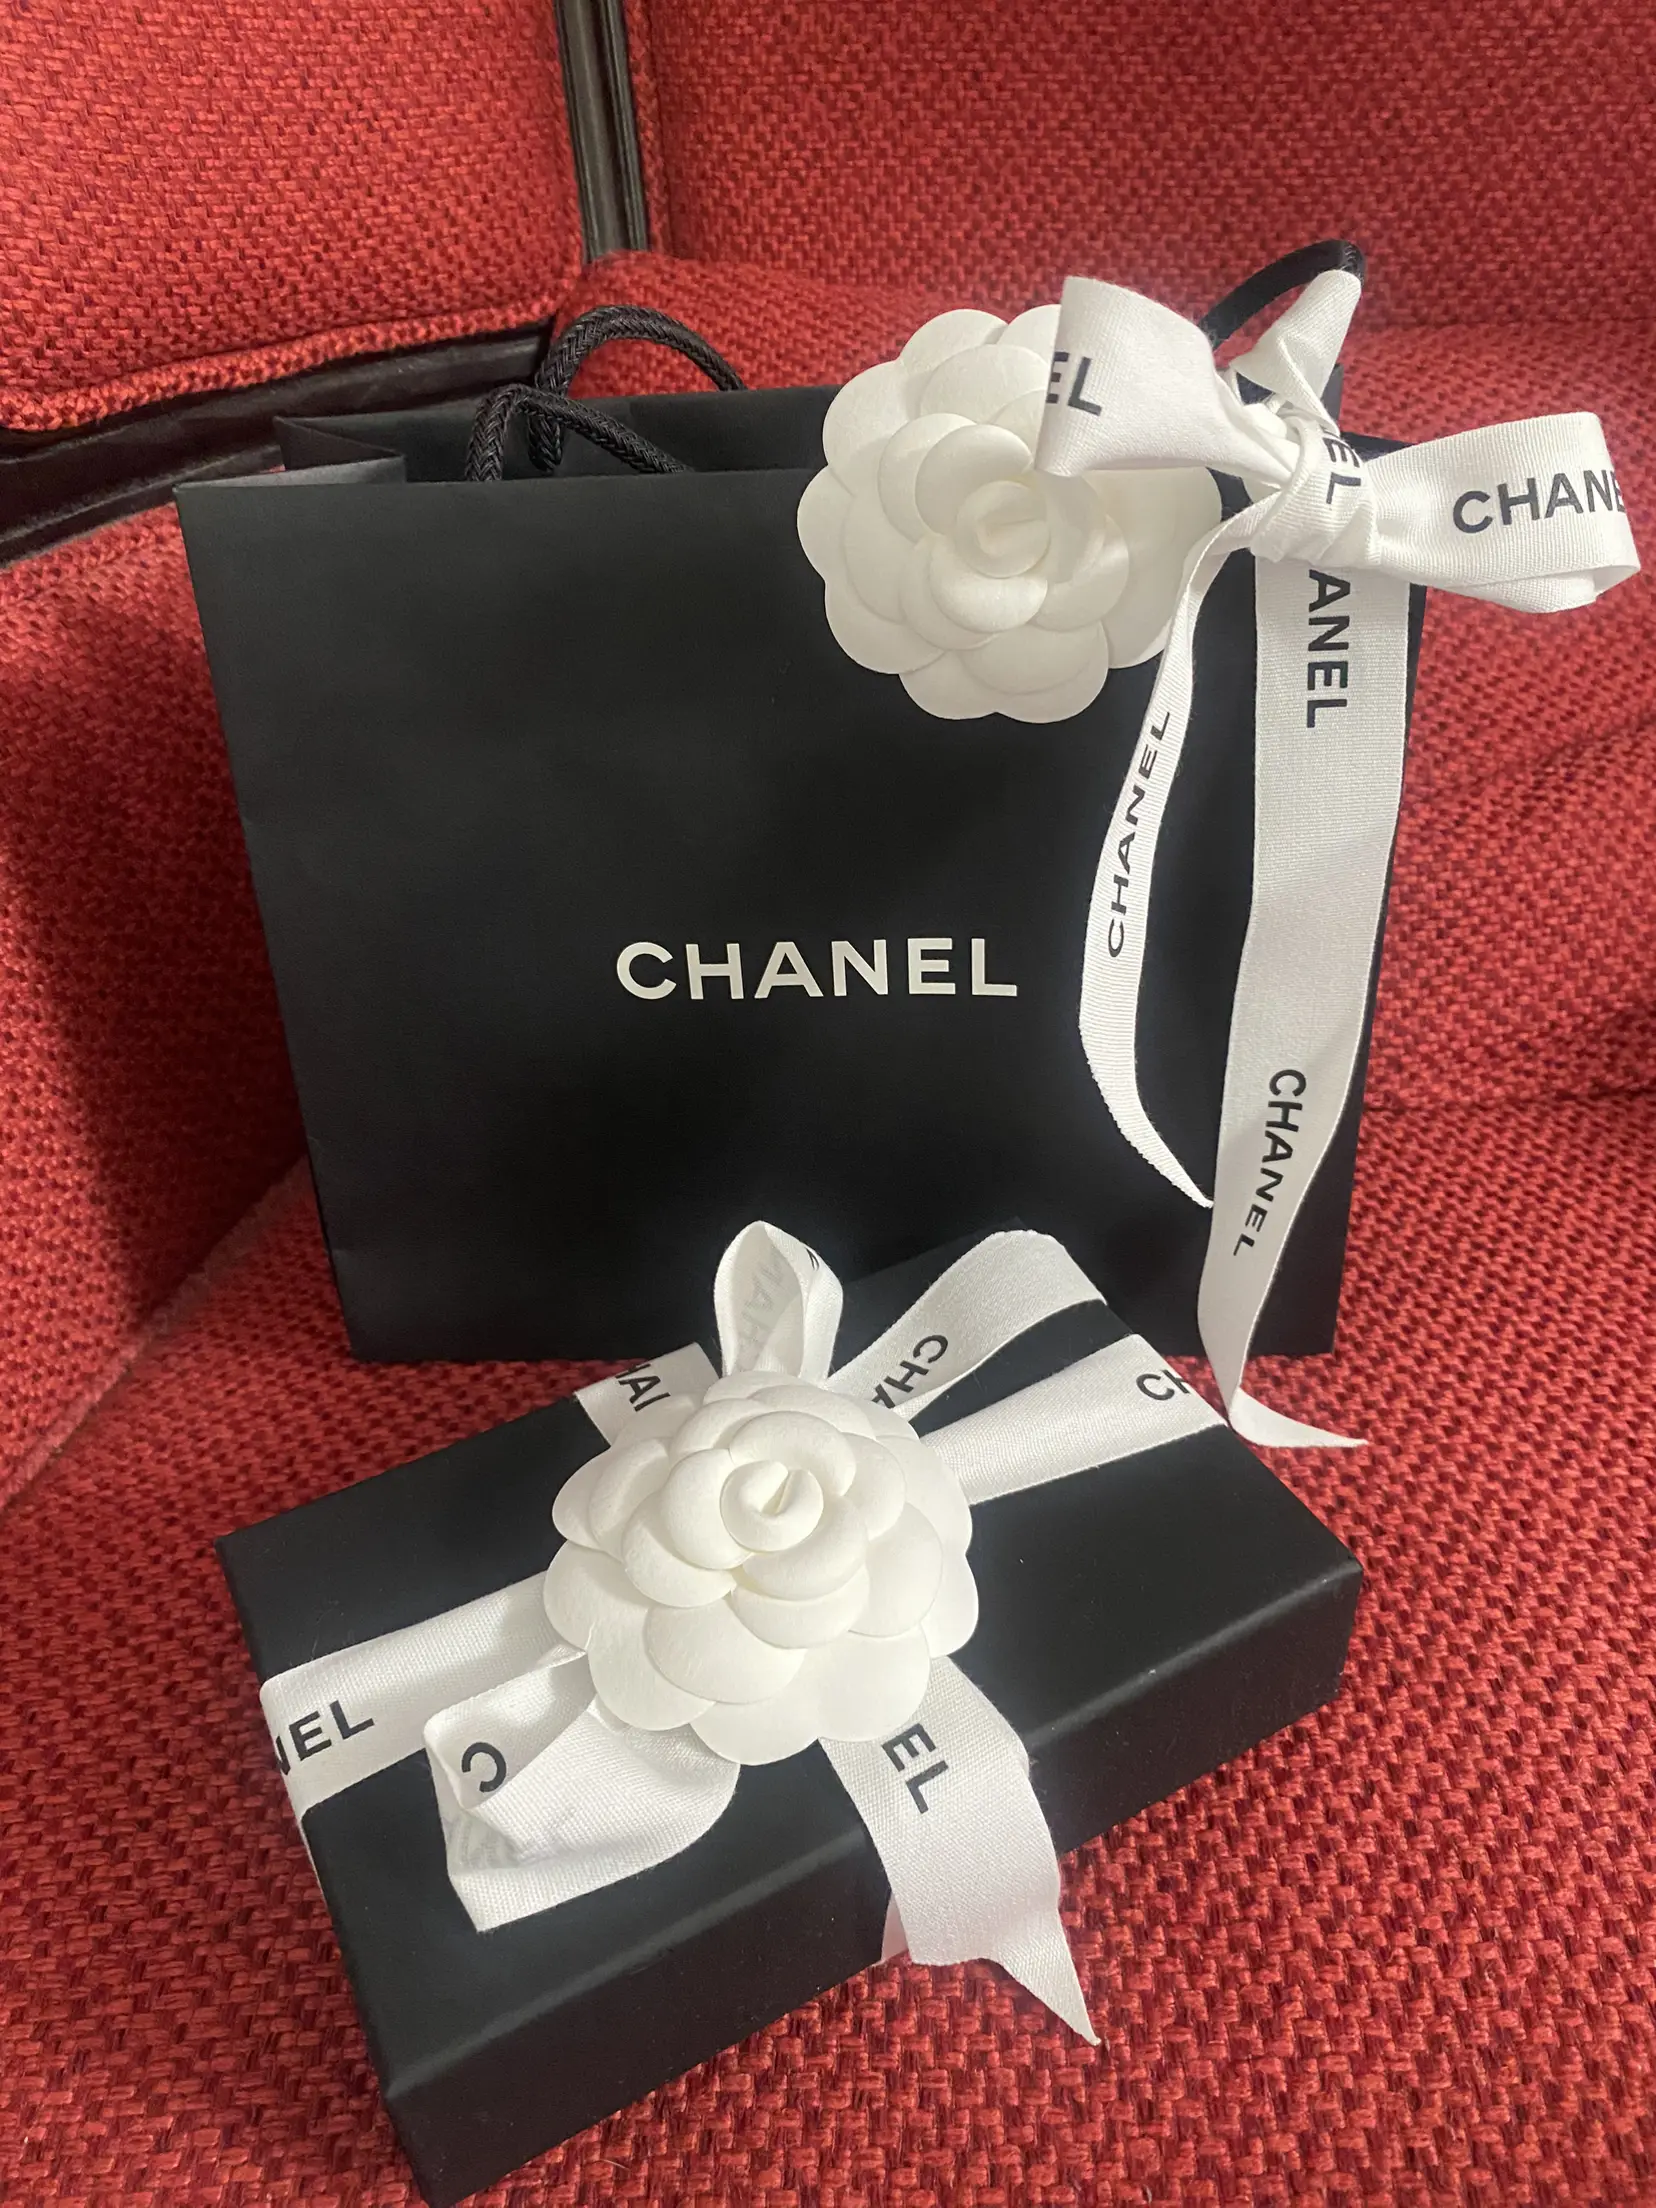 Review Chanel, Gallery posted by Oungice